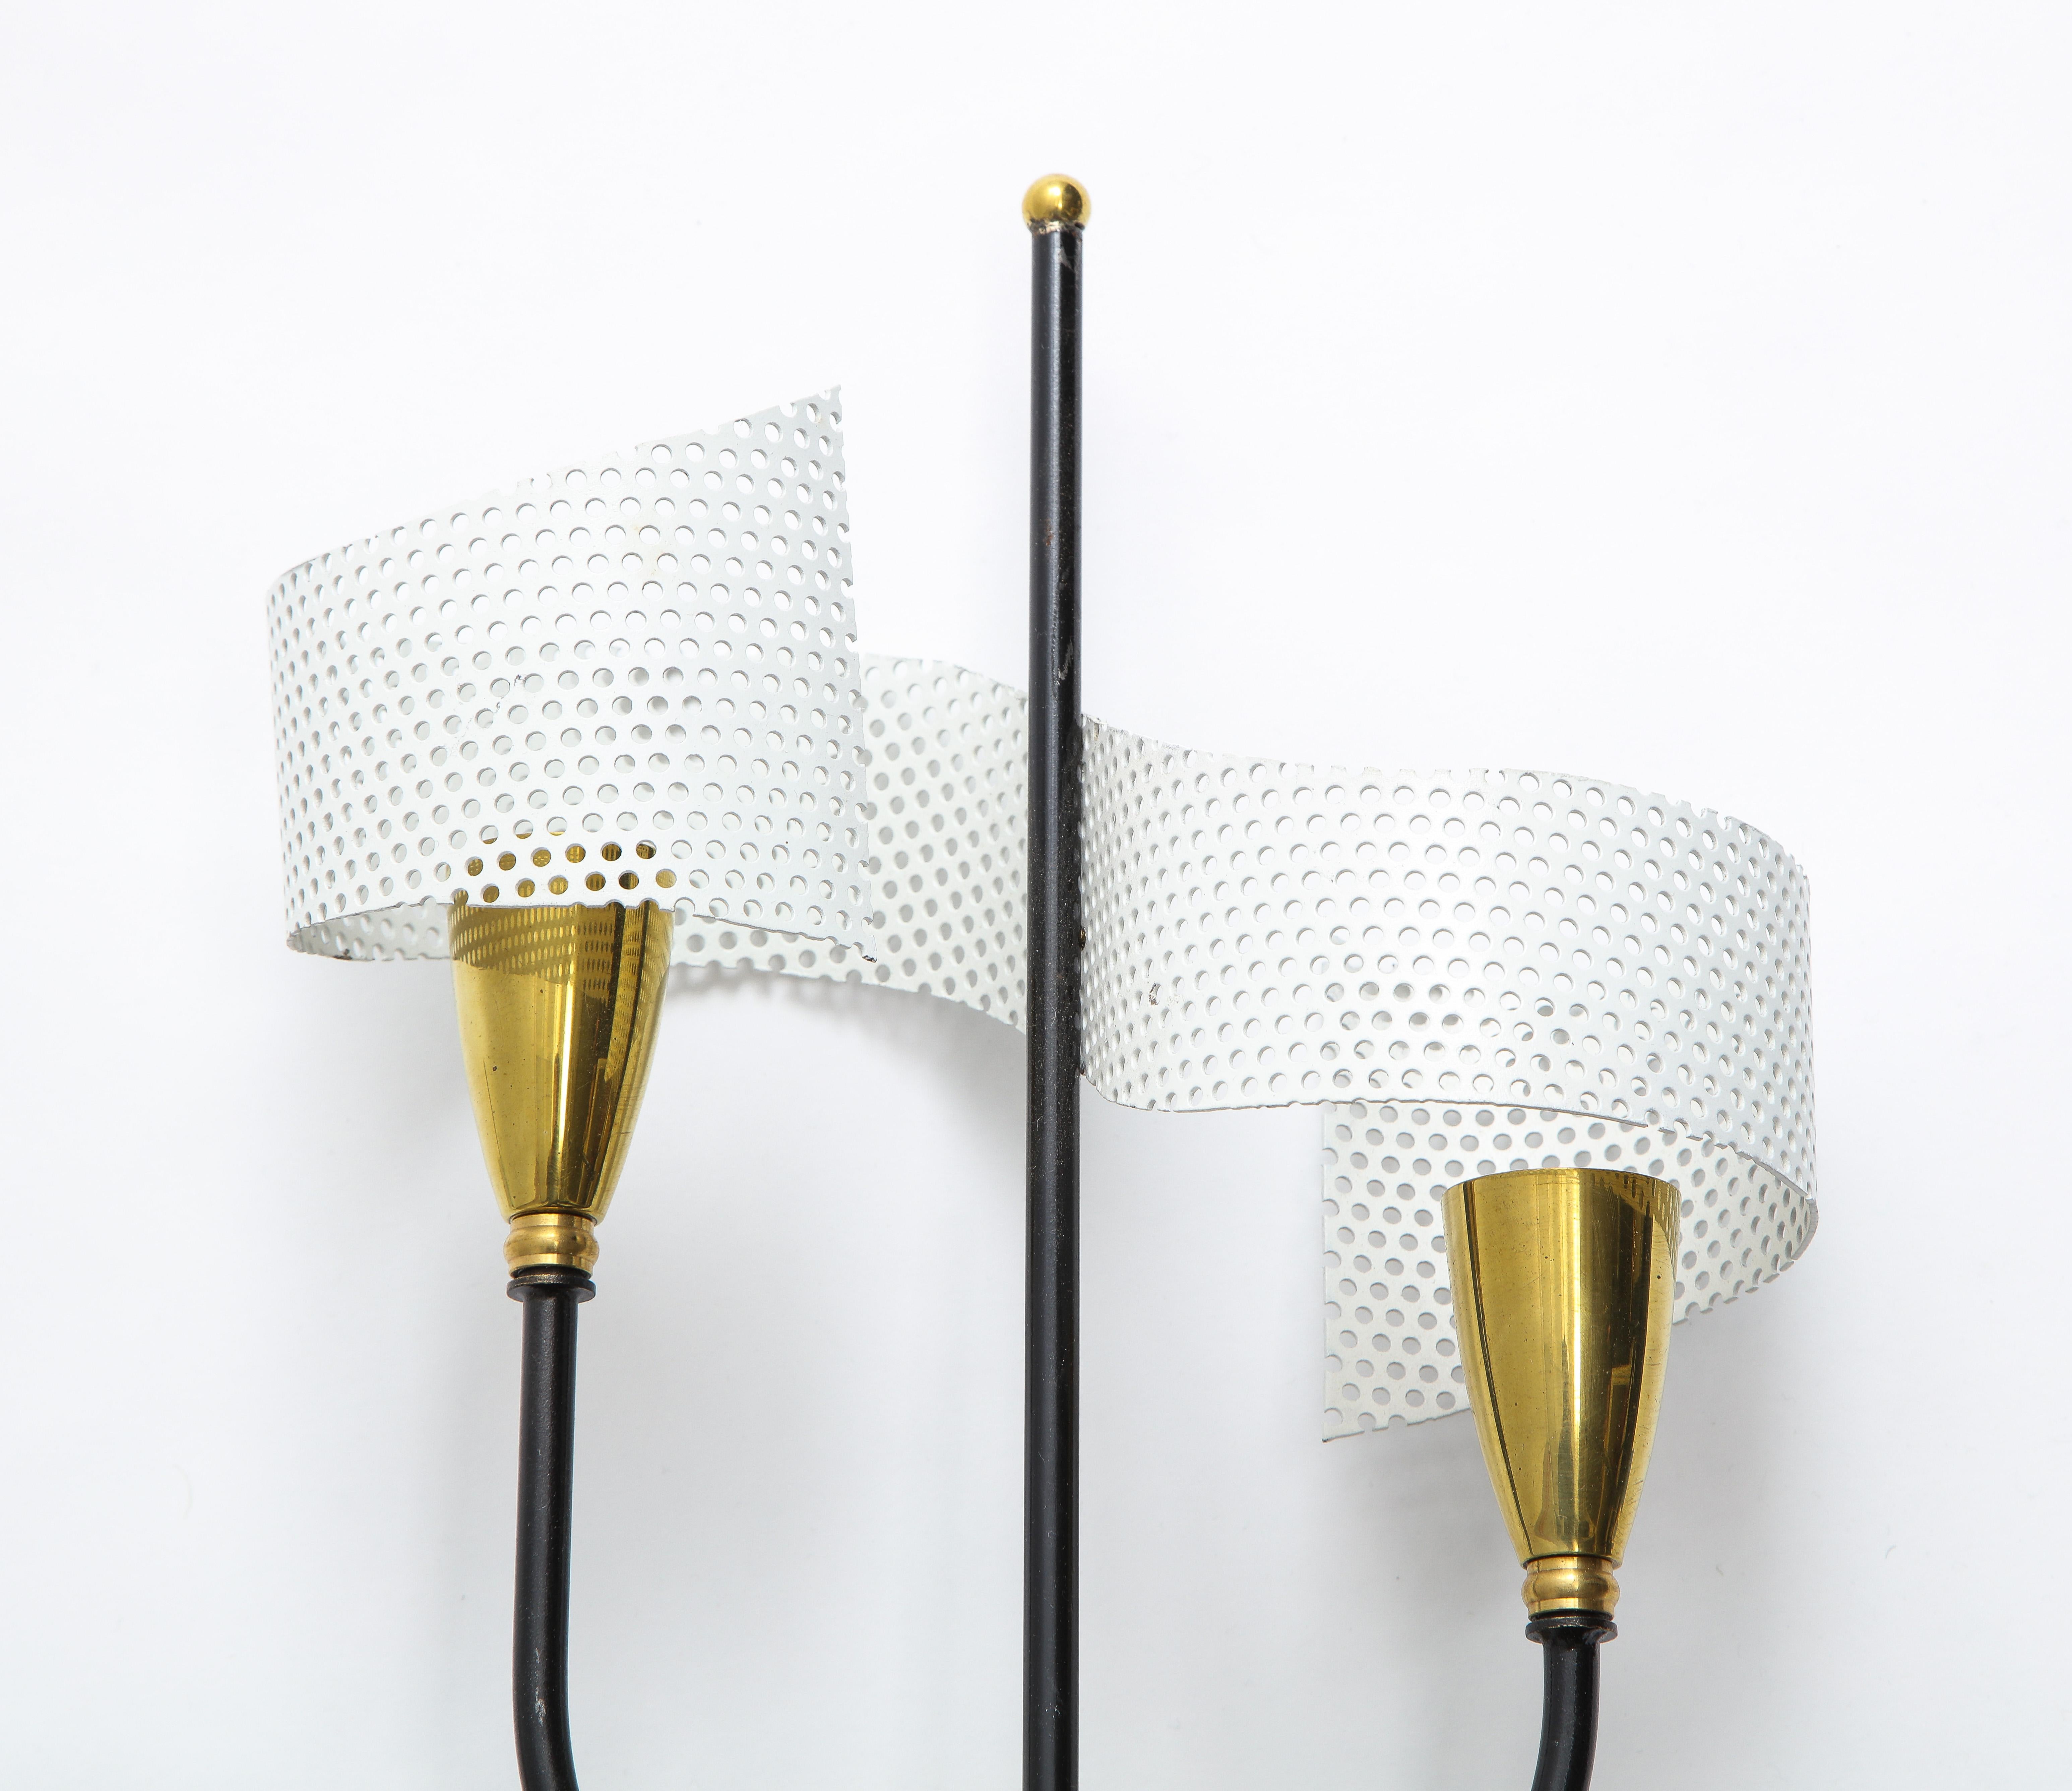 Pair of Scrolled Sconces in Brass and Aluminium by Mathieu, France, 1950s For Sale 2